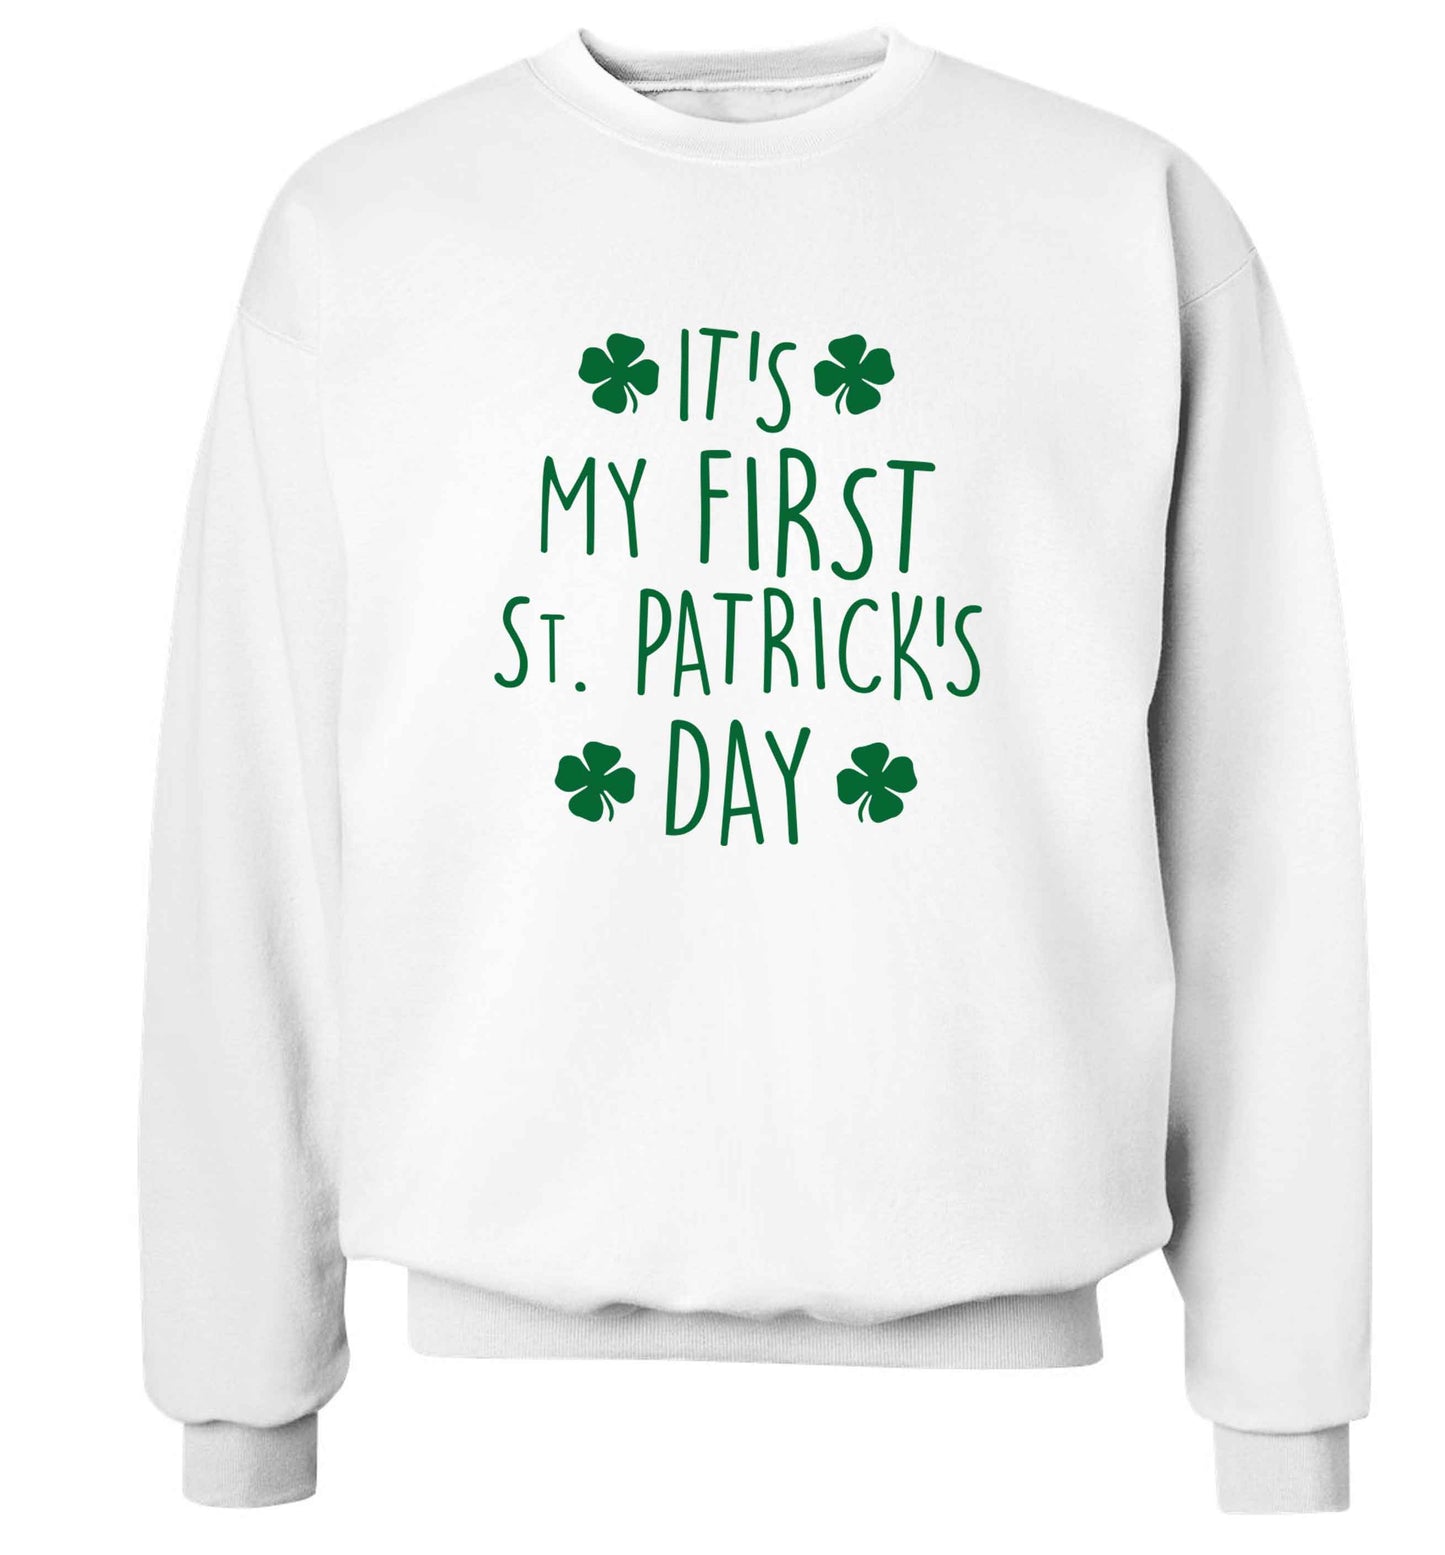 It's my first St.Patrick's day adult's unisex white sweater 2XL